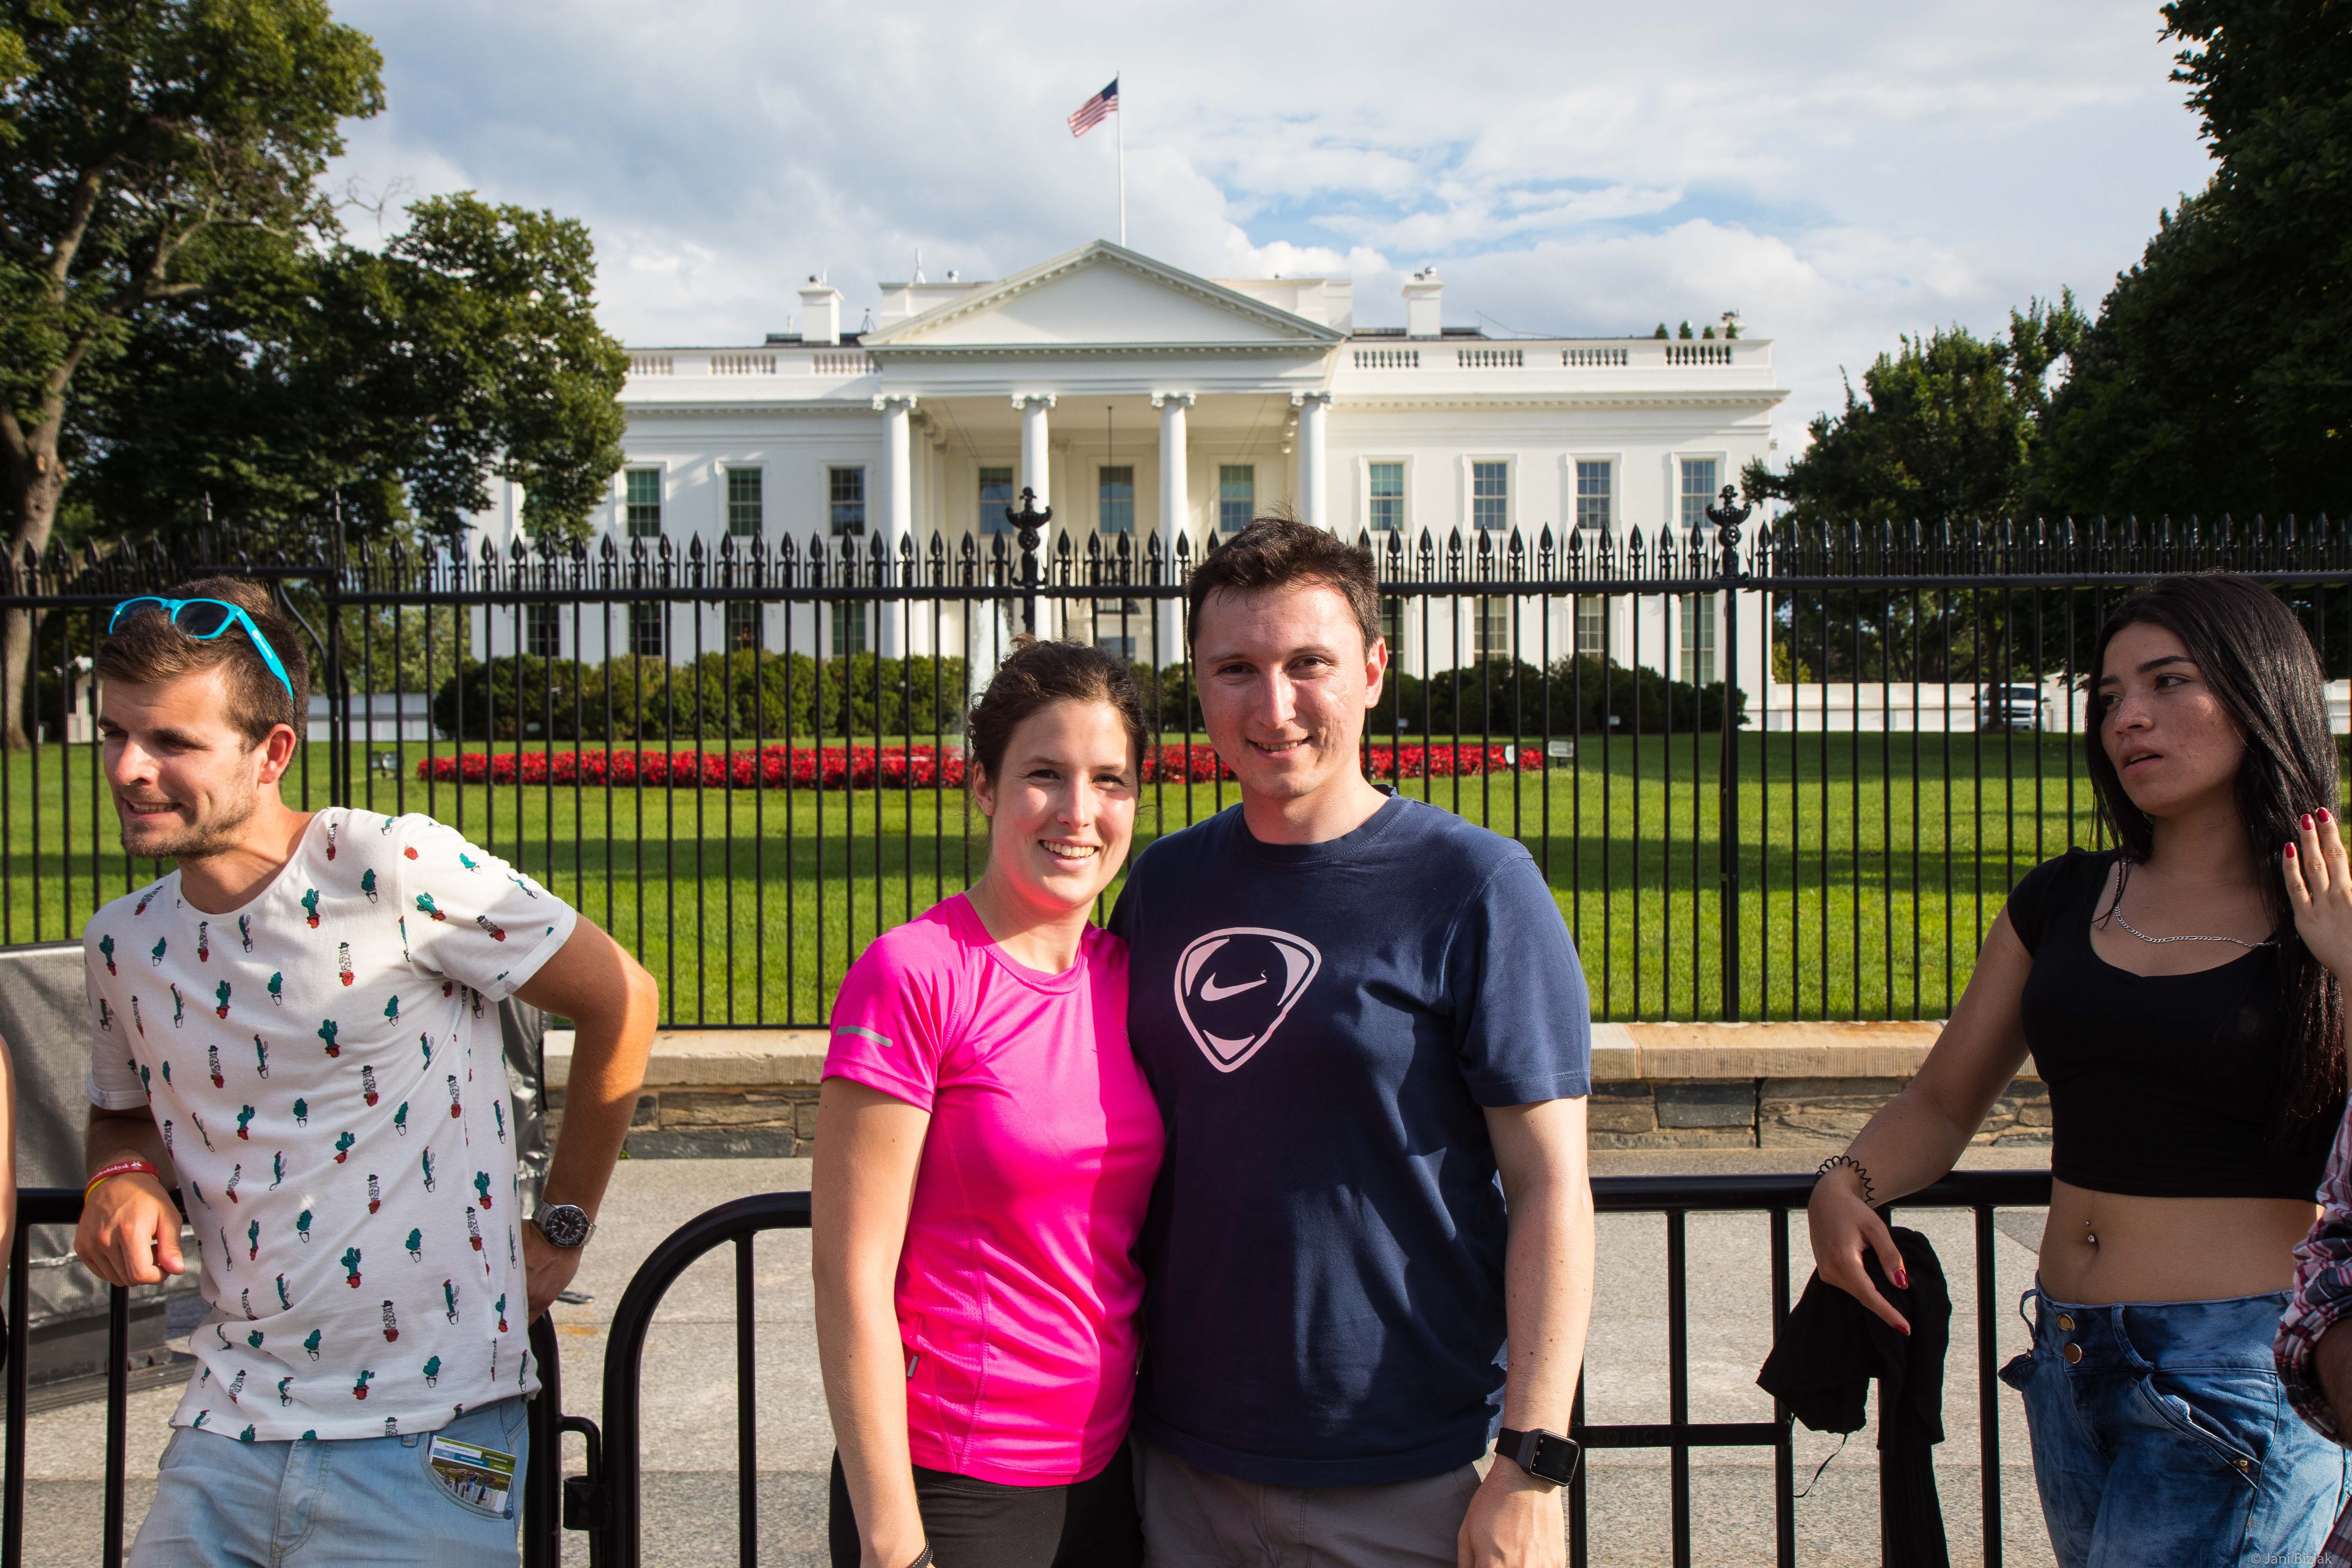 Veronika and I in front of the White house. Wonder if Obama was at home.